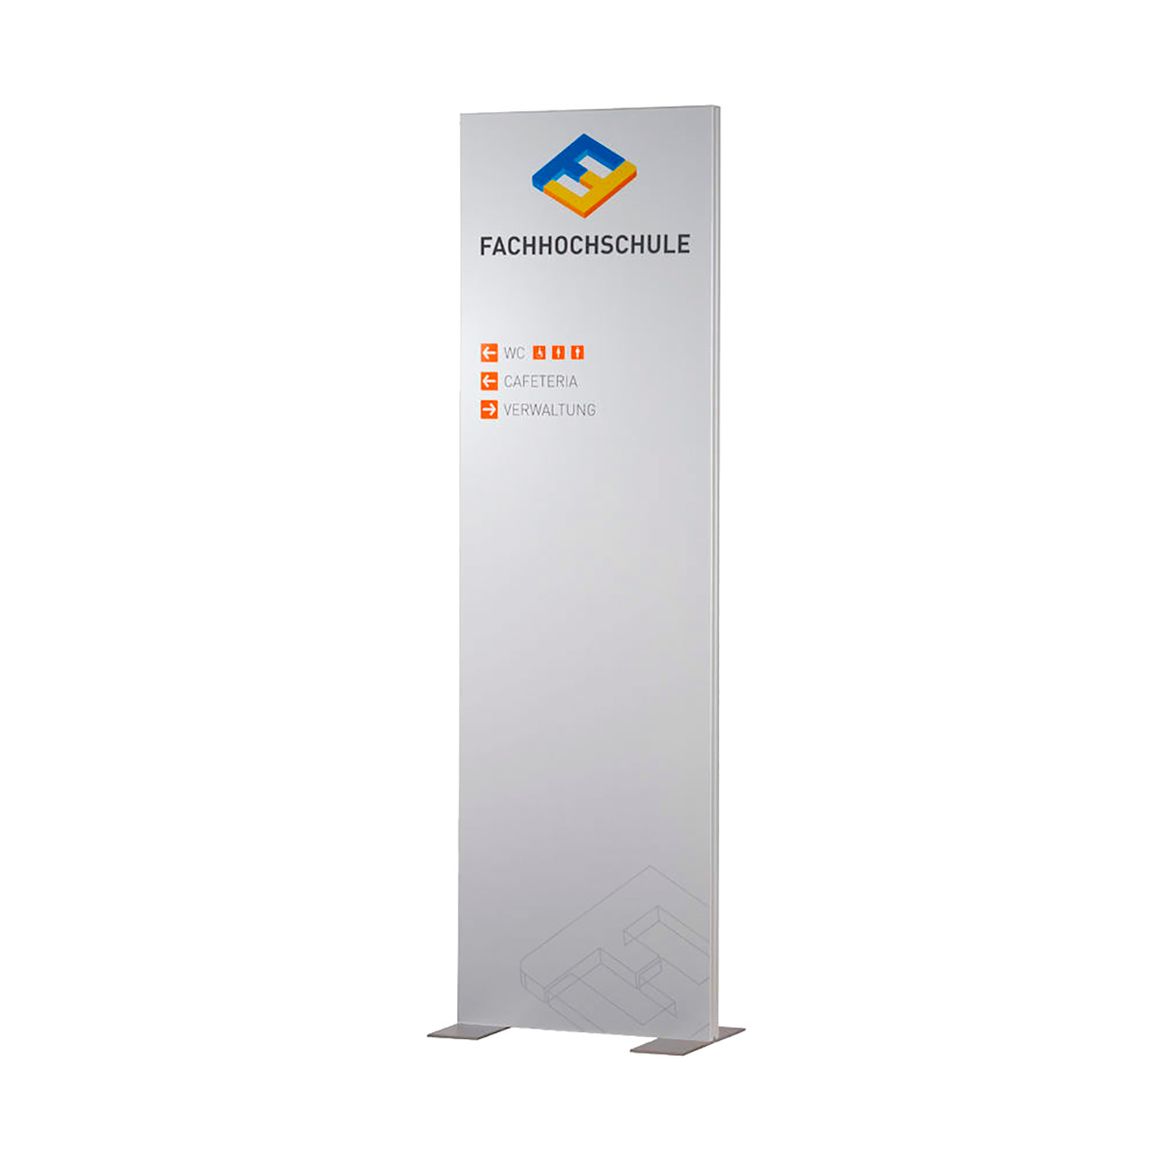 Information totem for university of applied sciences